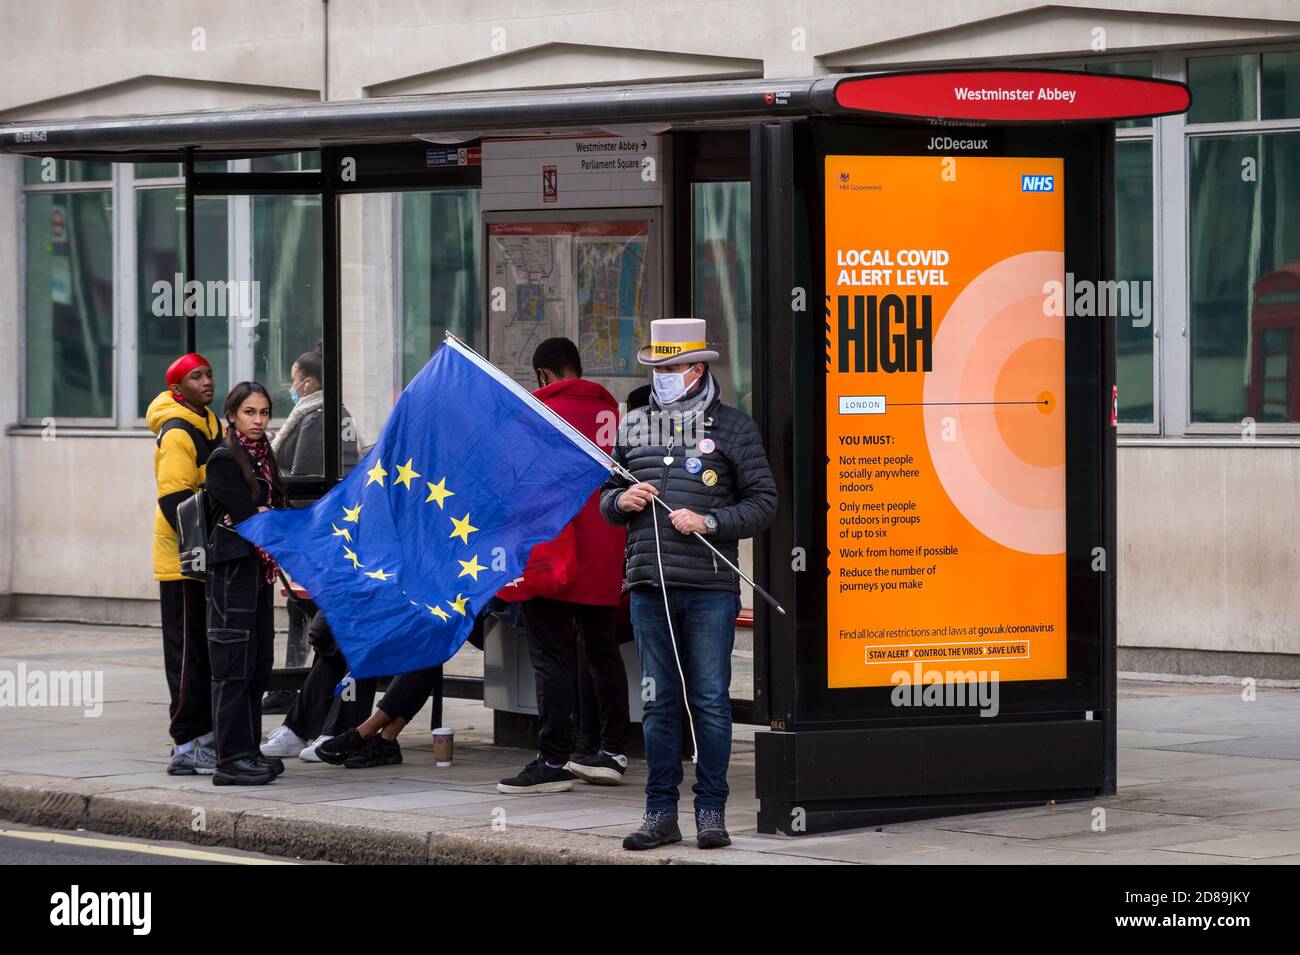 London, UK.  28 October 2020.  Steve Bray, an anti-Brexit protester from SODEM next to a Covid-19 alert related sign at a bus stop outside the Department for Business, Energy & Industrial Strategy in Westminster.  Michel Barnier, the European Commission's Head of Task Force for Relations with the United Kingdom, is attending meetings inside.  Credit: Stephen Chung / Alamy Live News Stock Photo